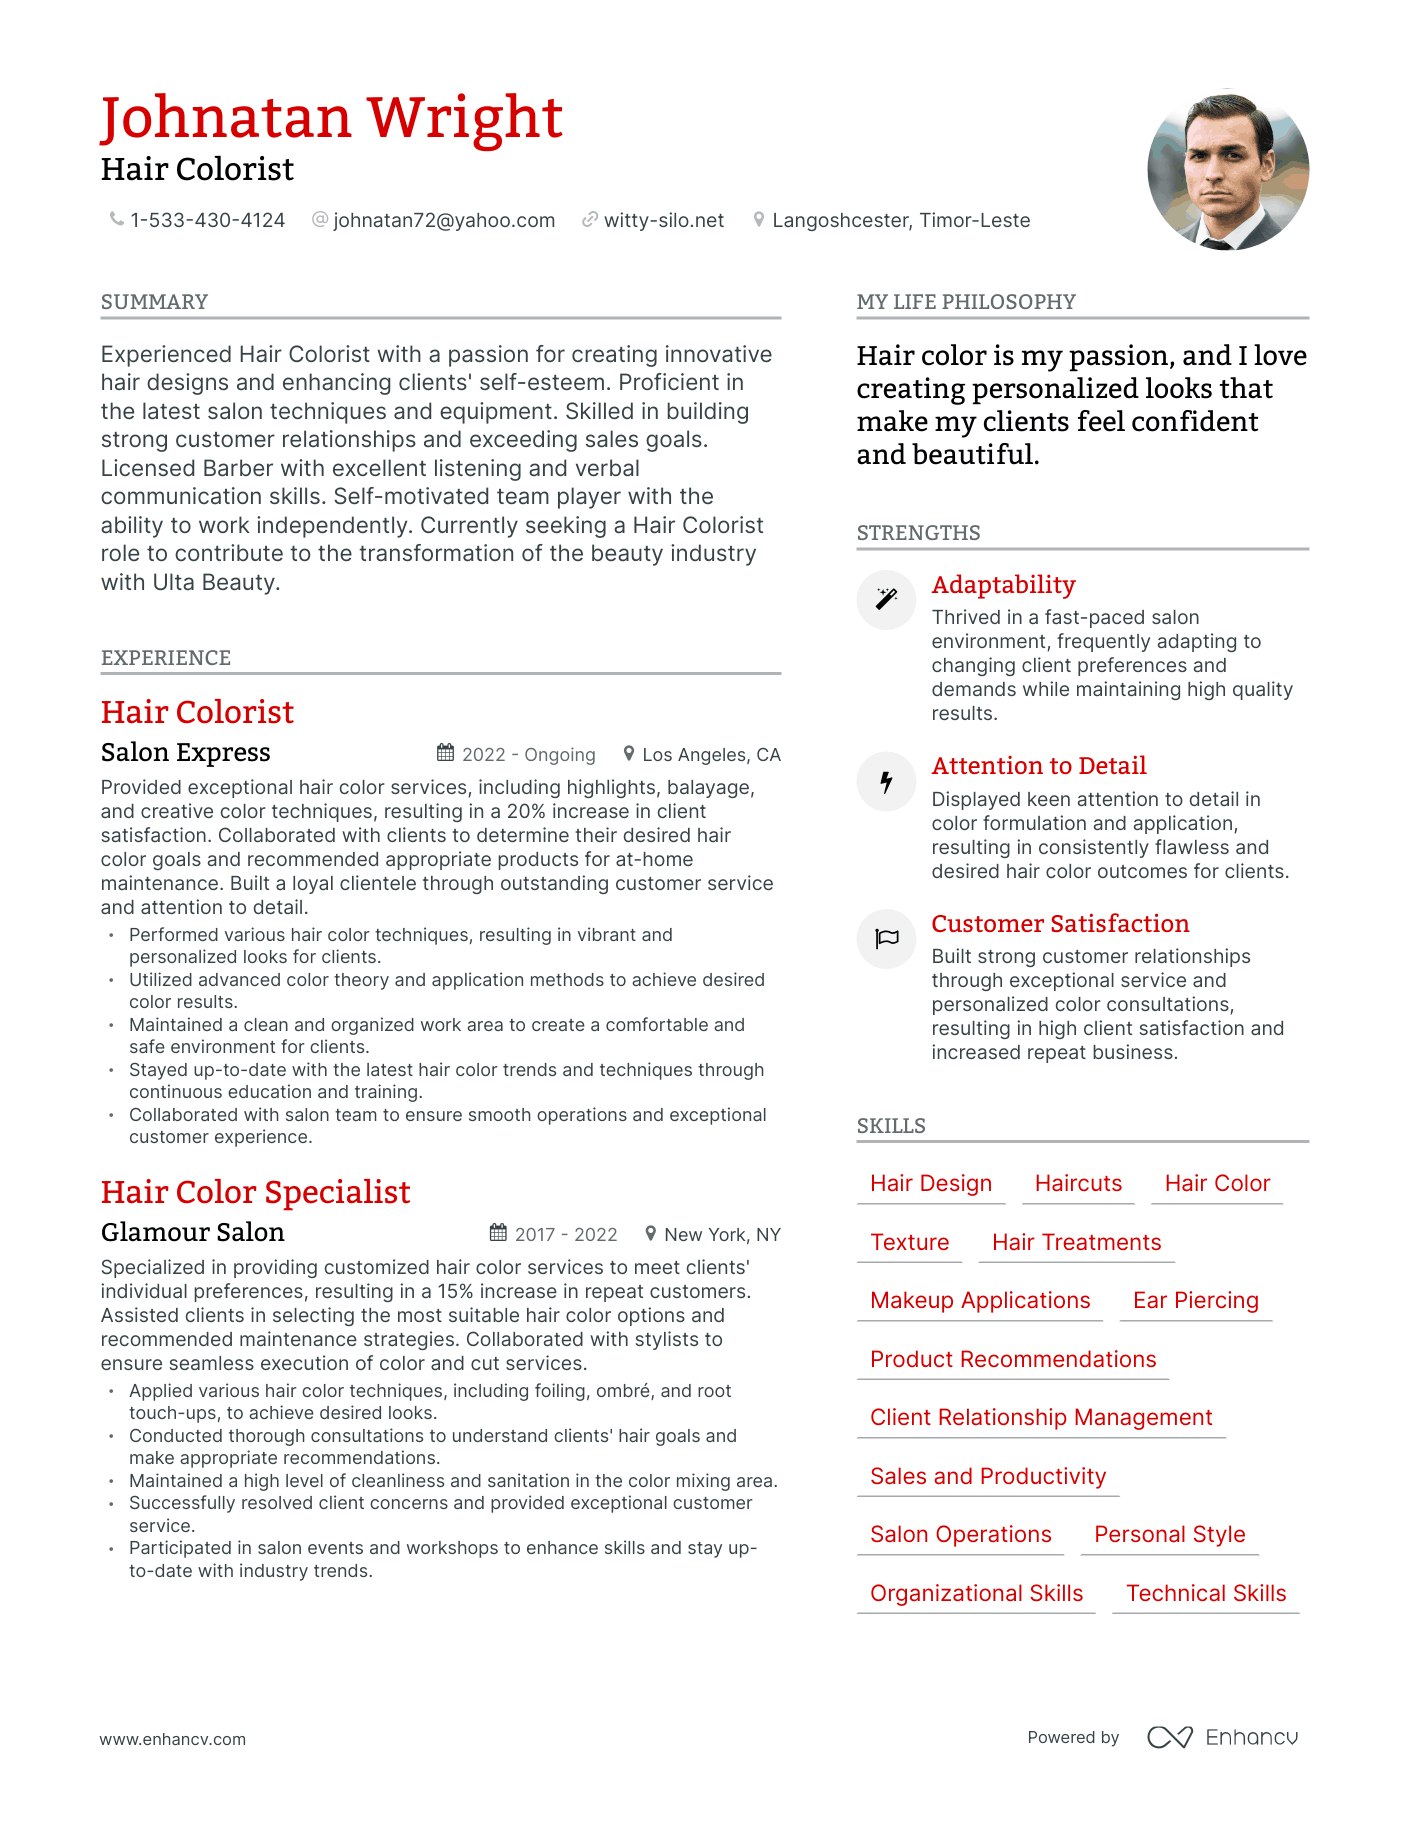 Hair Colorist resume example